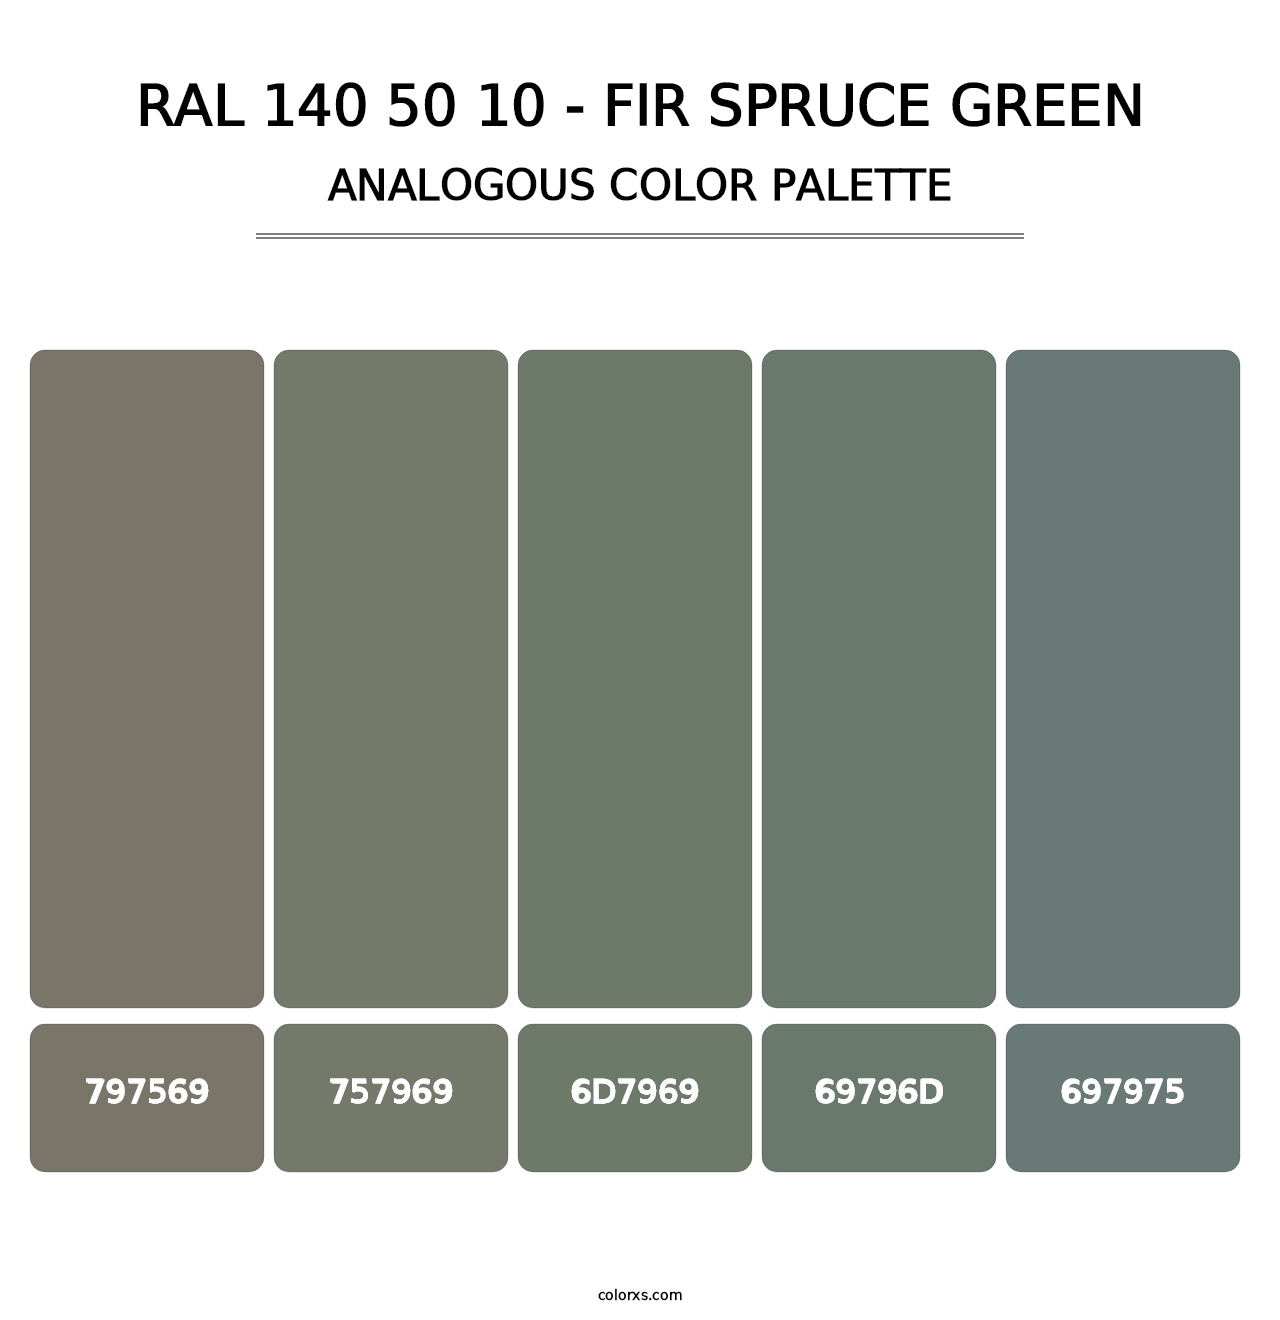 RAL 140 50 10 - Fir Spruce Green - Analogous Color Palette